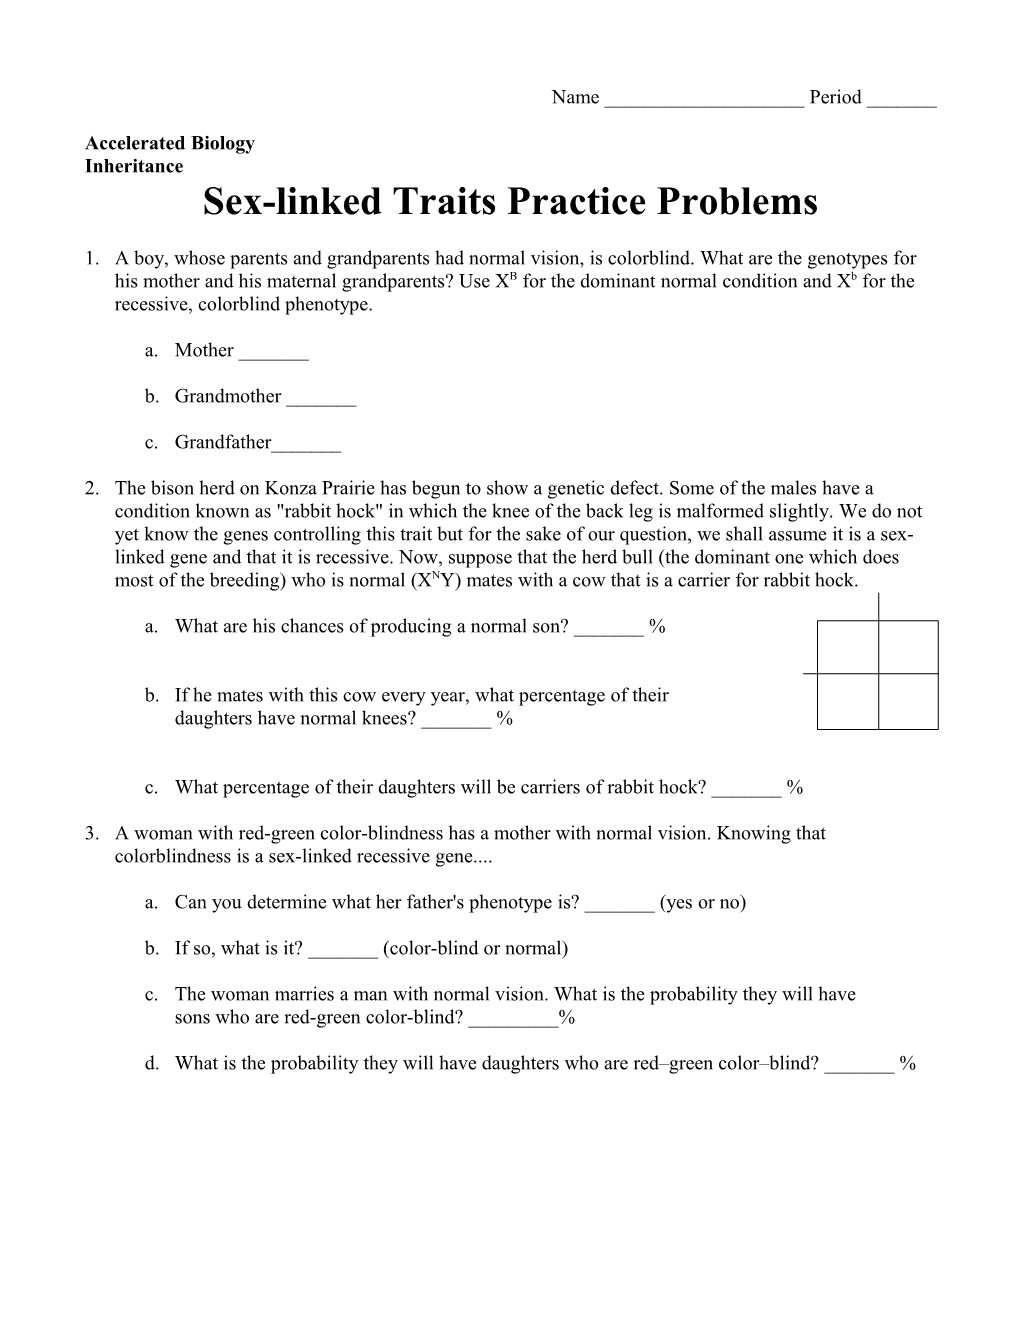 Sex-Linked Traits Practice Problems